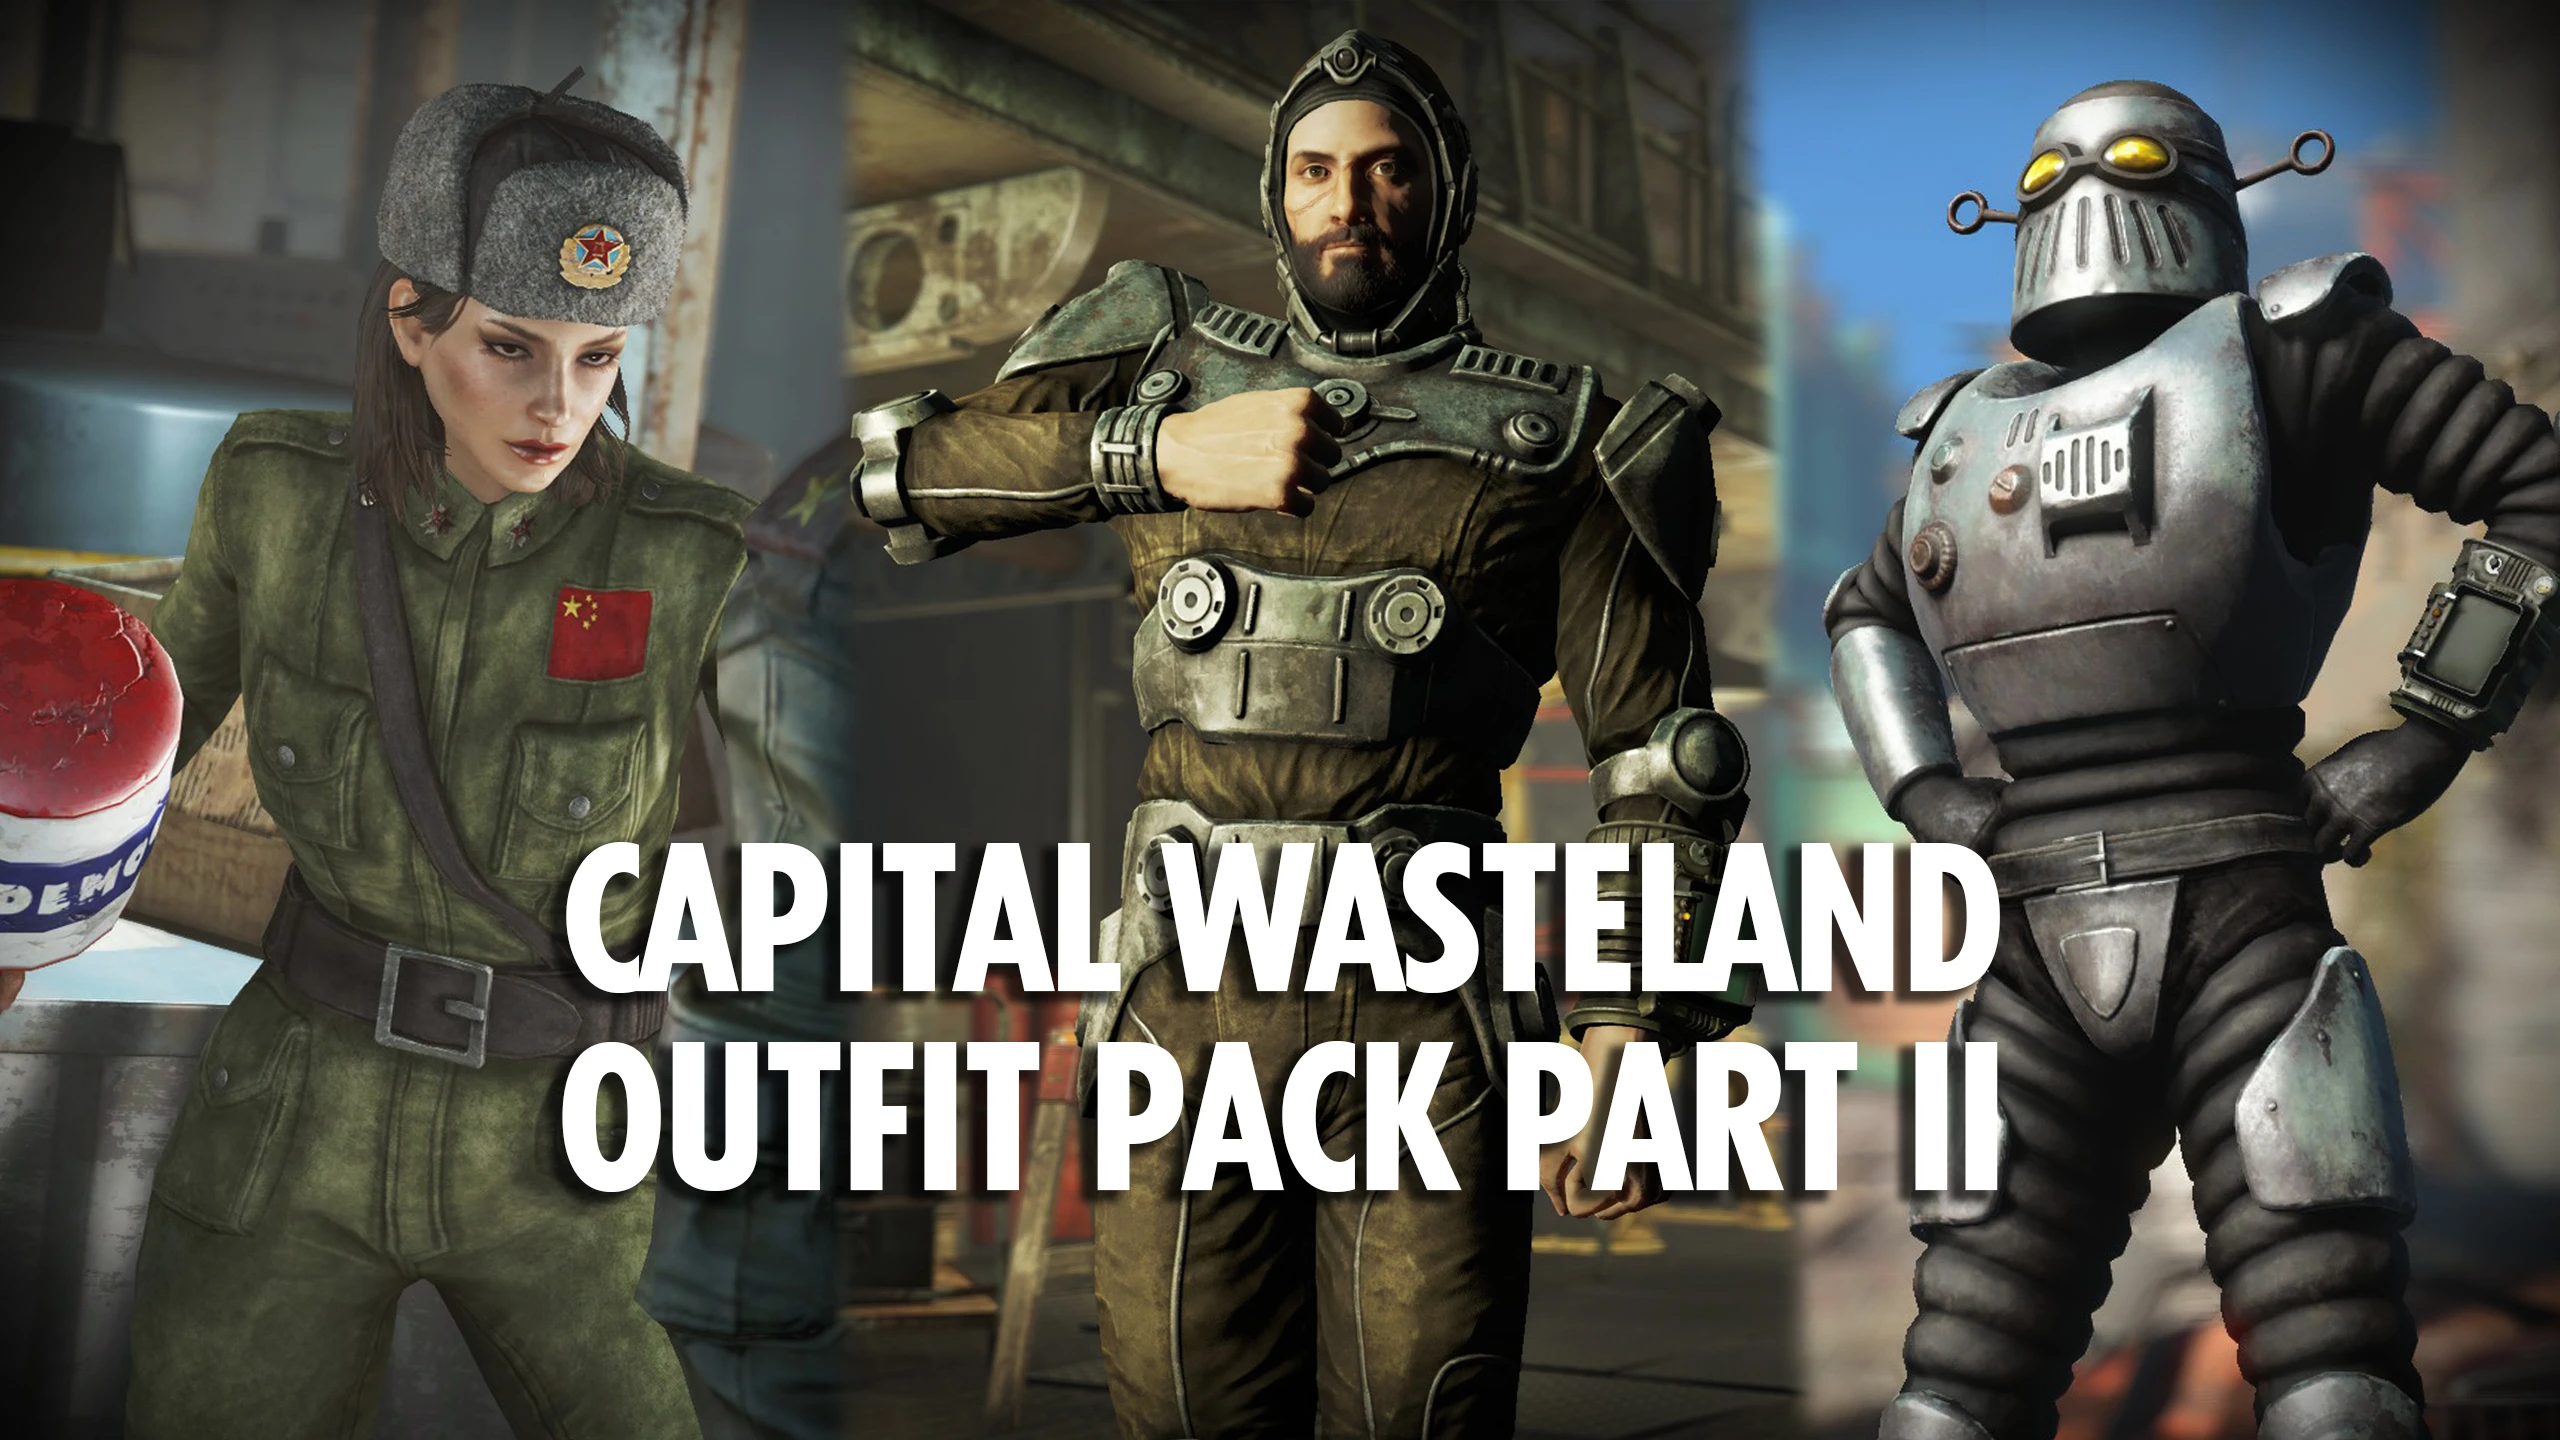 Capital wasteland robot pack fallout 4 фото 20